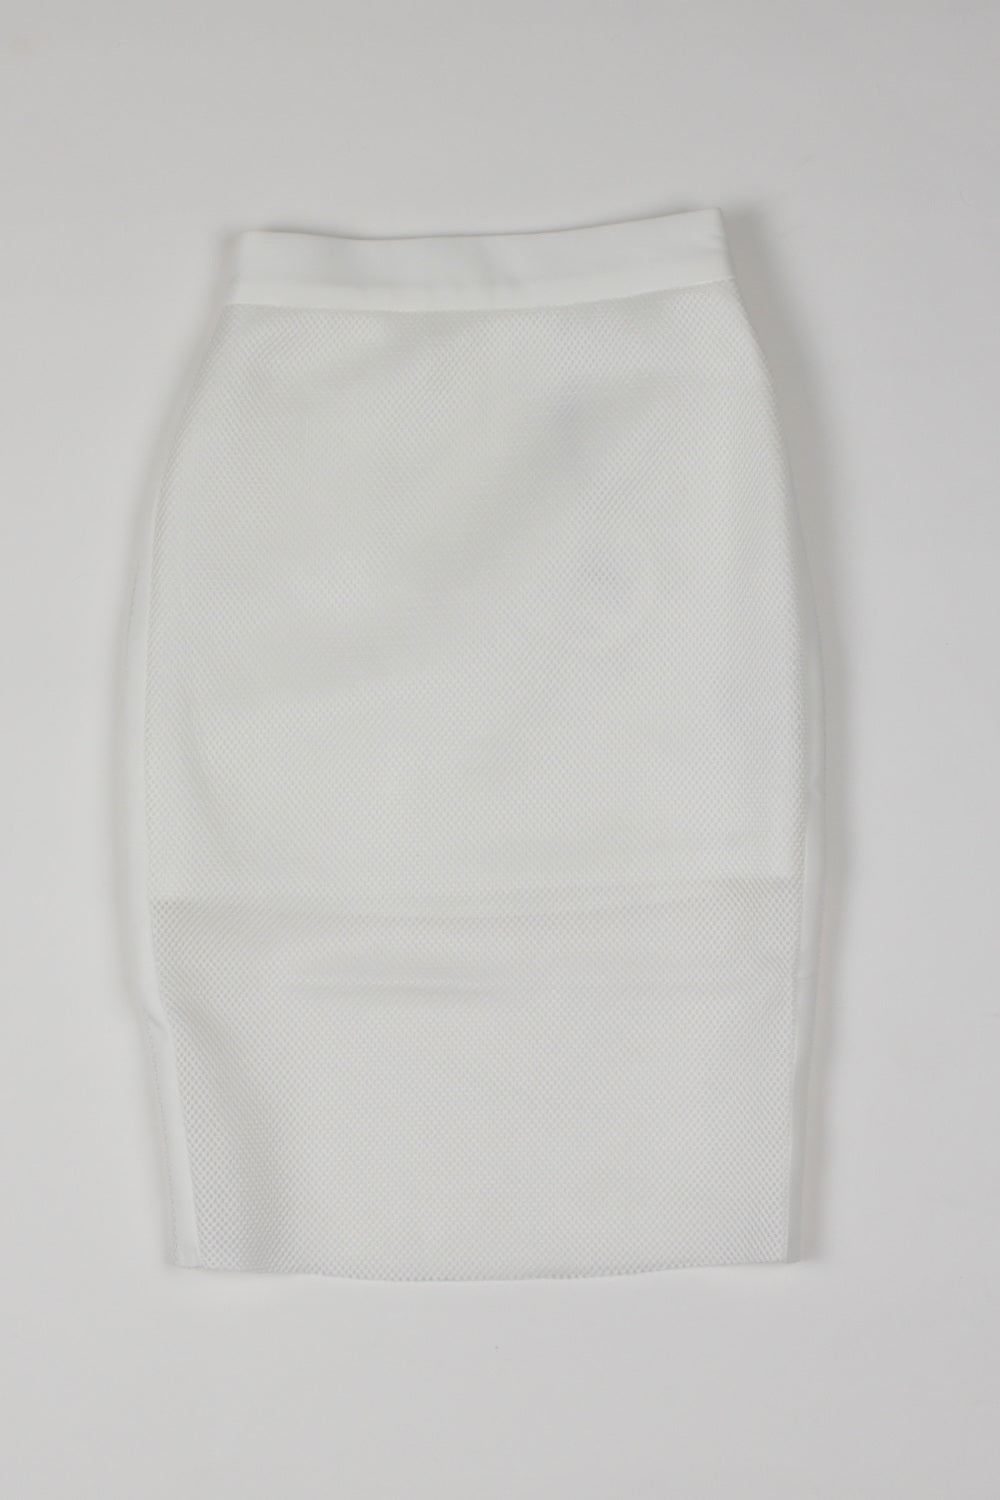 Cameo White Acoustic Skirt XS